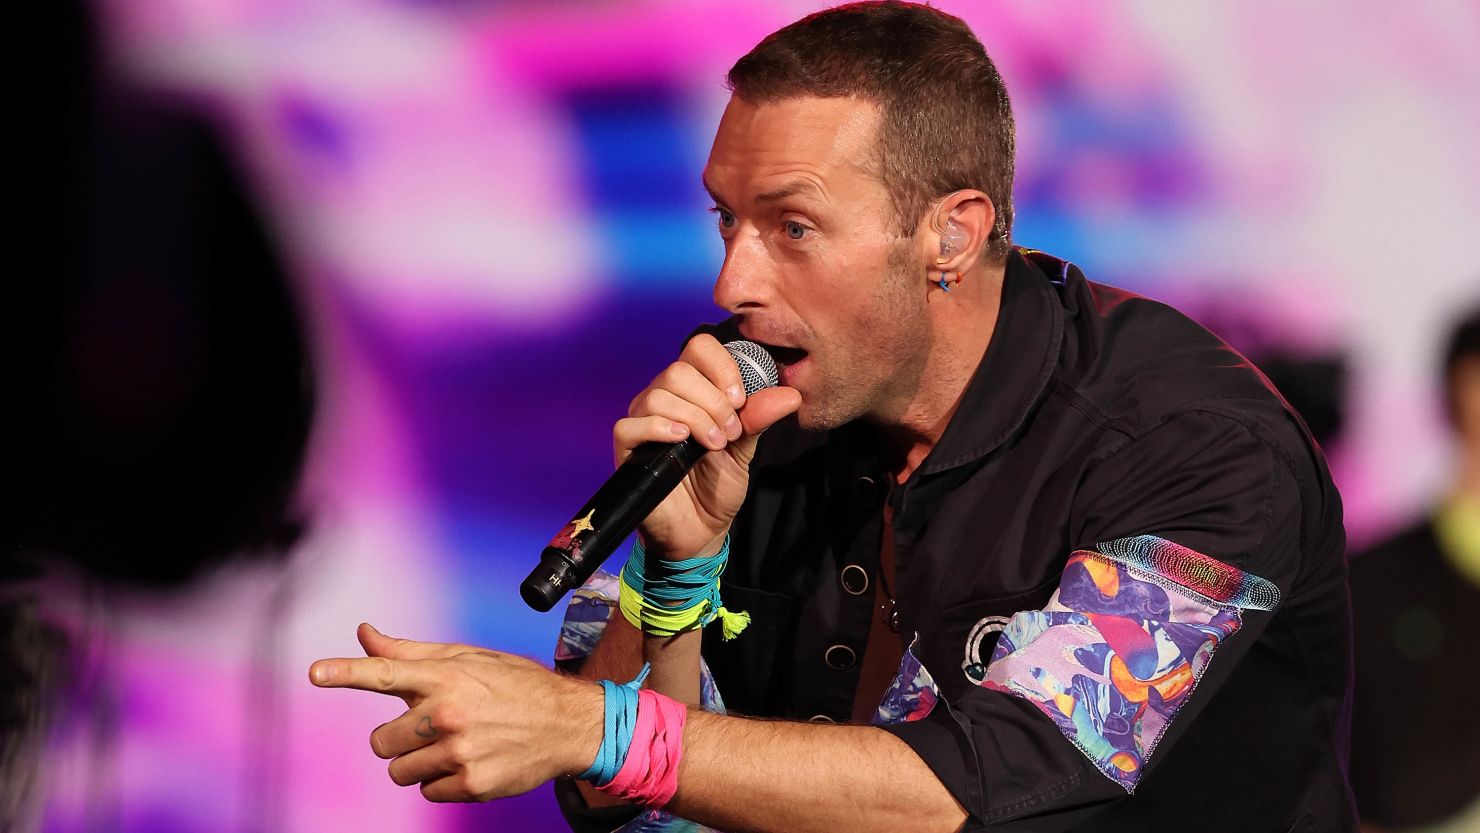 Coldplay has been touring Asia's biggest cities for the past year. Will concerts in Beijing and Shanghai be next?